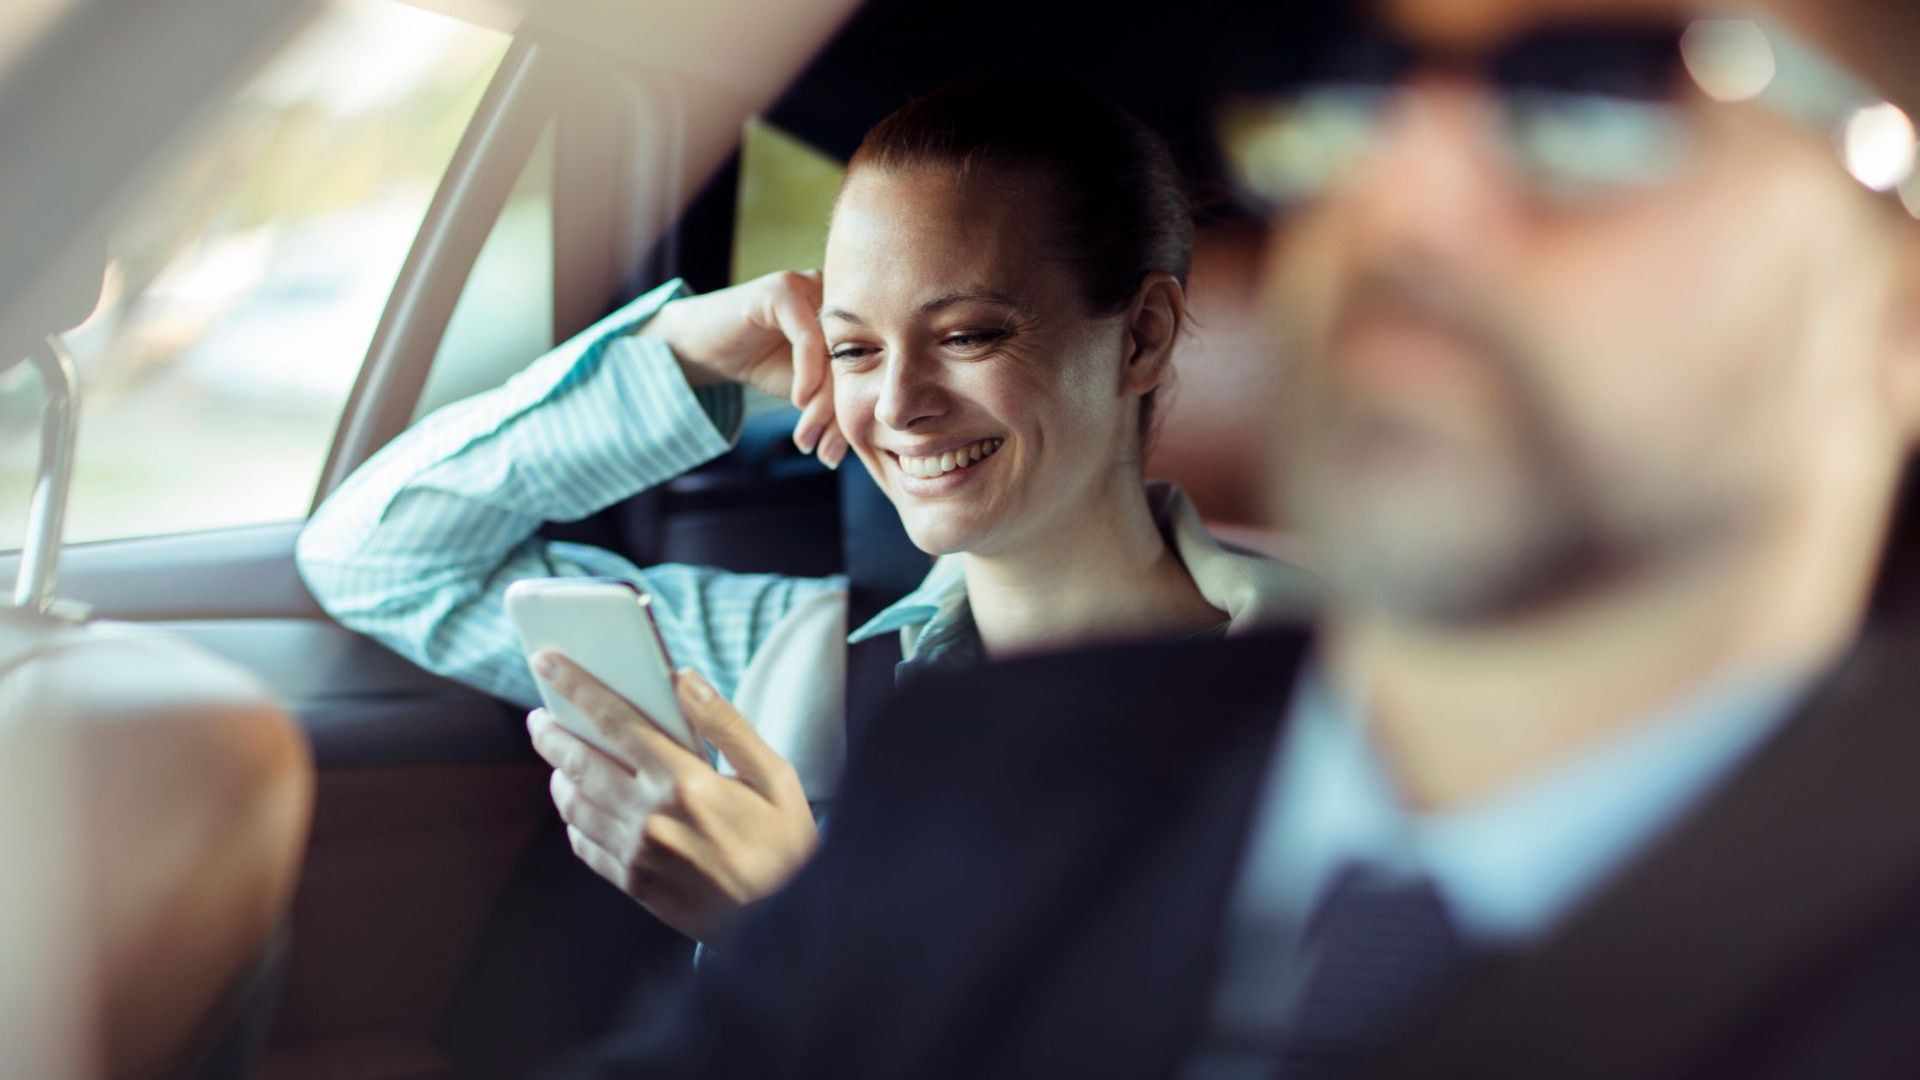 businesswoman in a professional blue shirt smiles while looking at her smartphone in the backseat